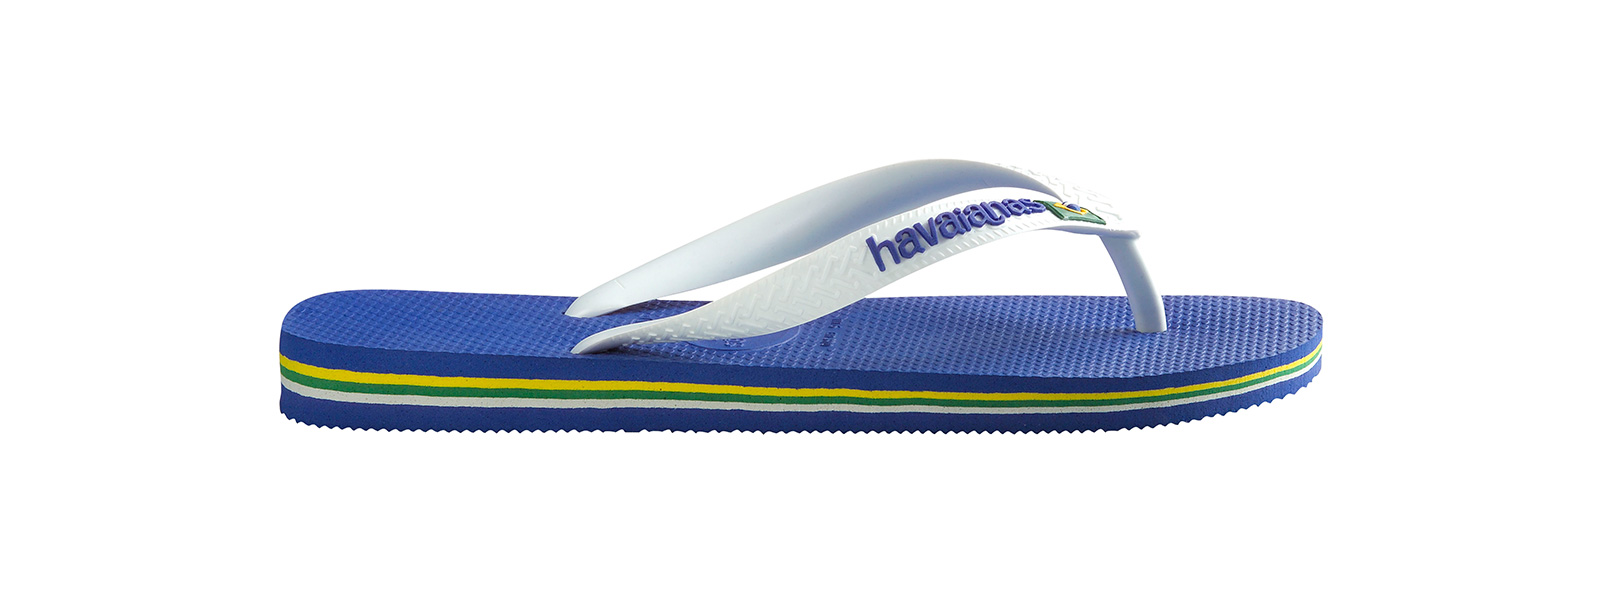 Blue And White Flip Flops From Havaianas With Logo - Brasil Logo Marine ...